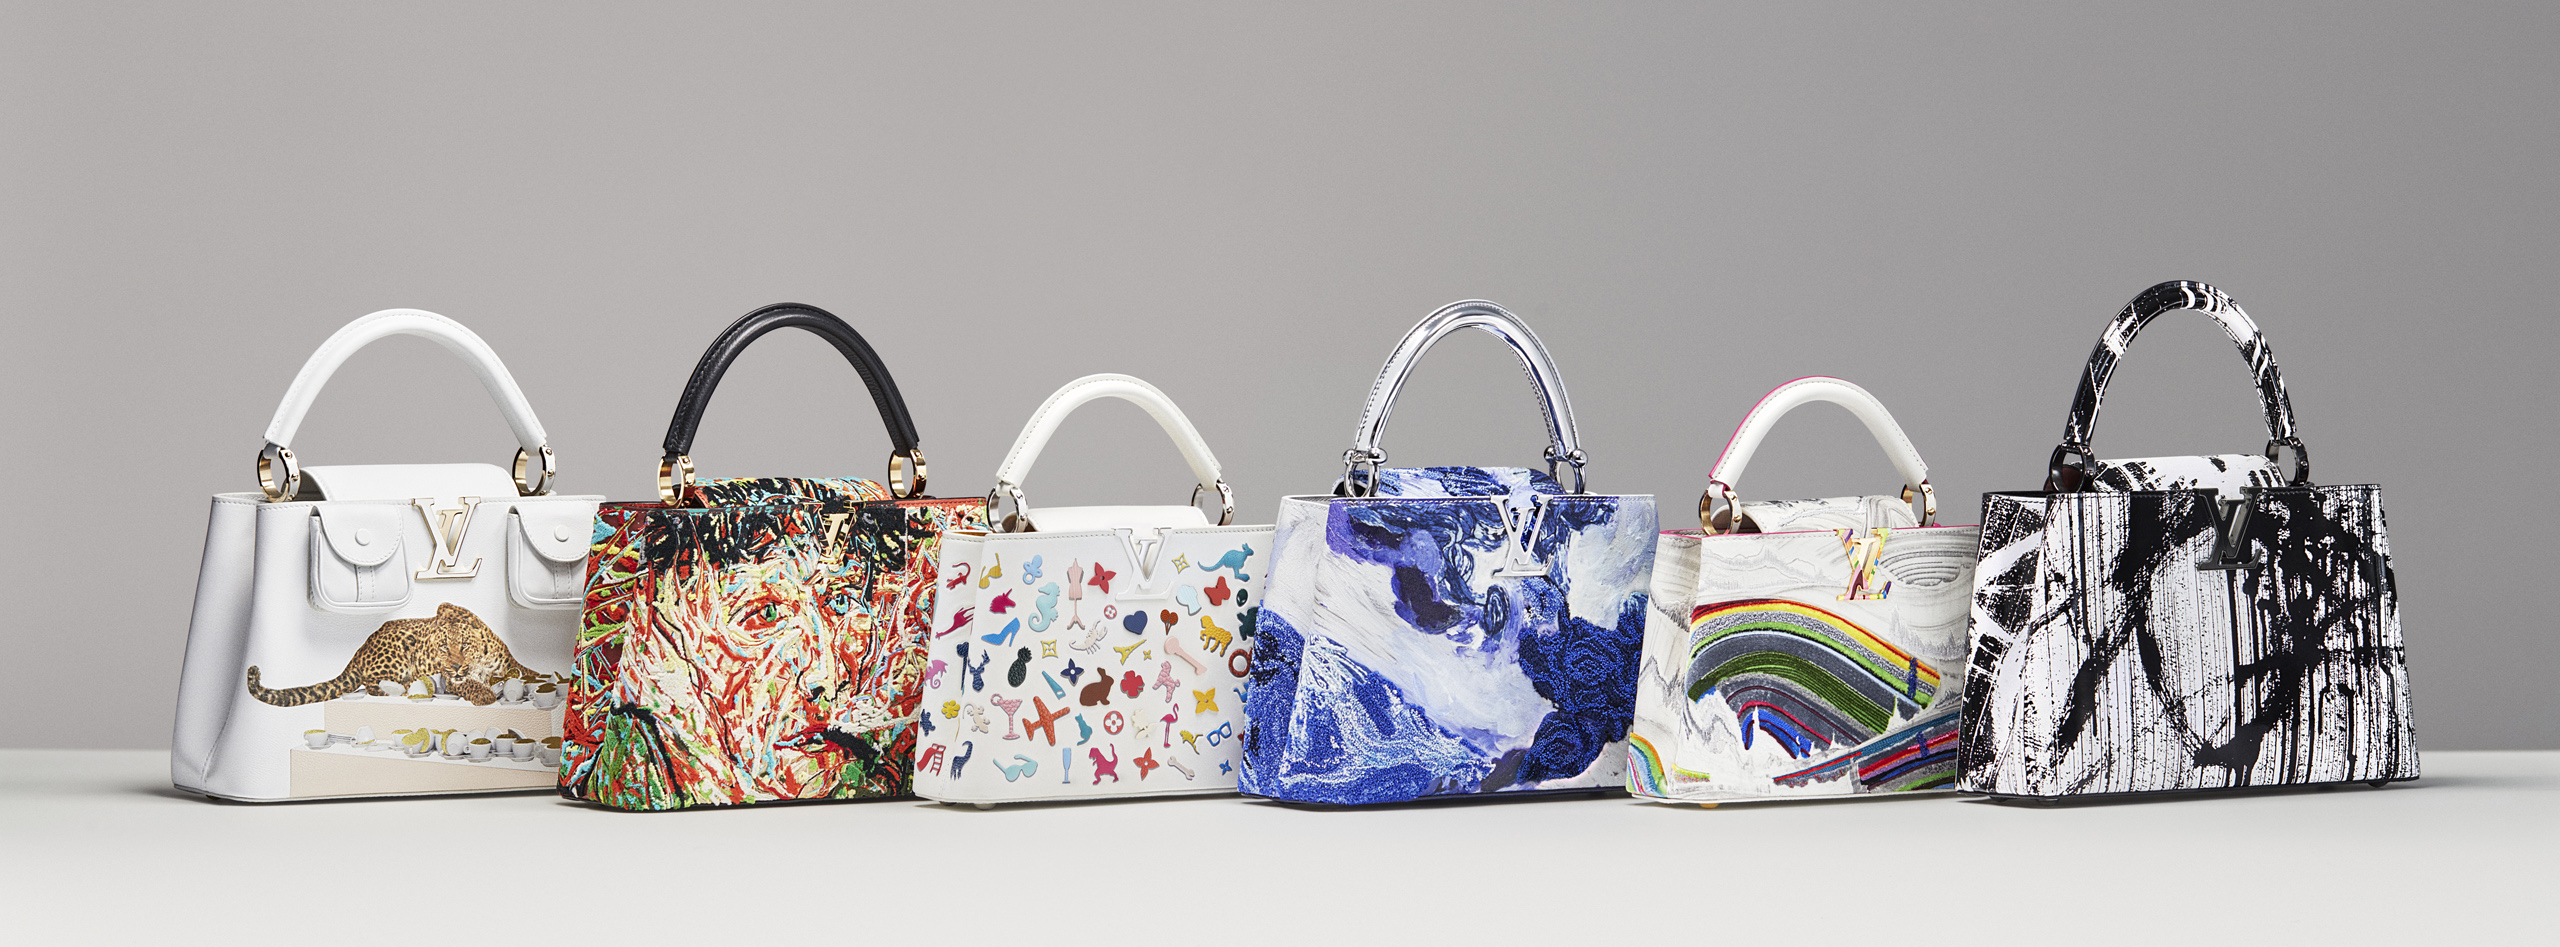 Louis Vuitton Presents 'Crafting Dreams' in L.A. – WWD